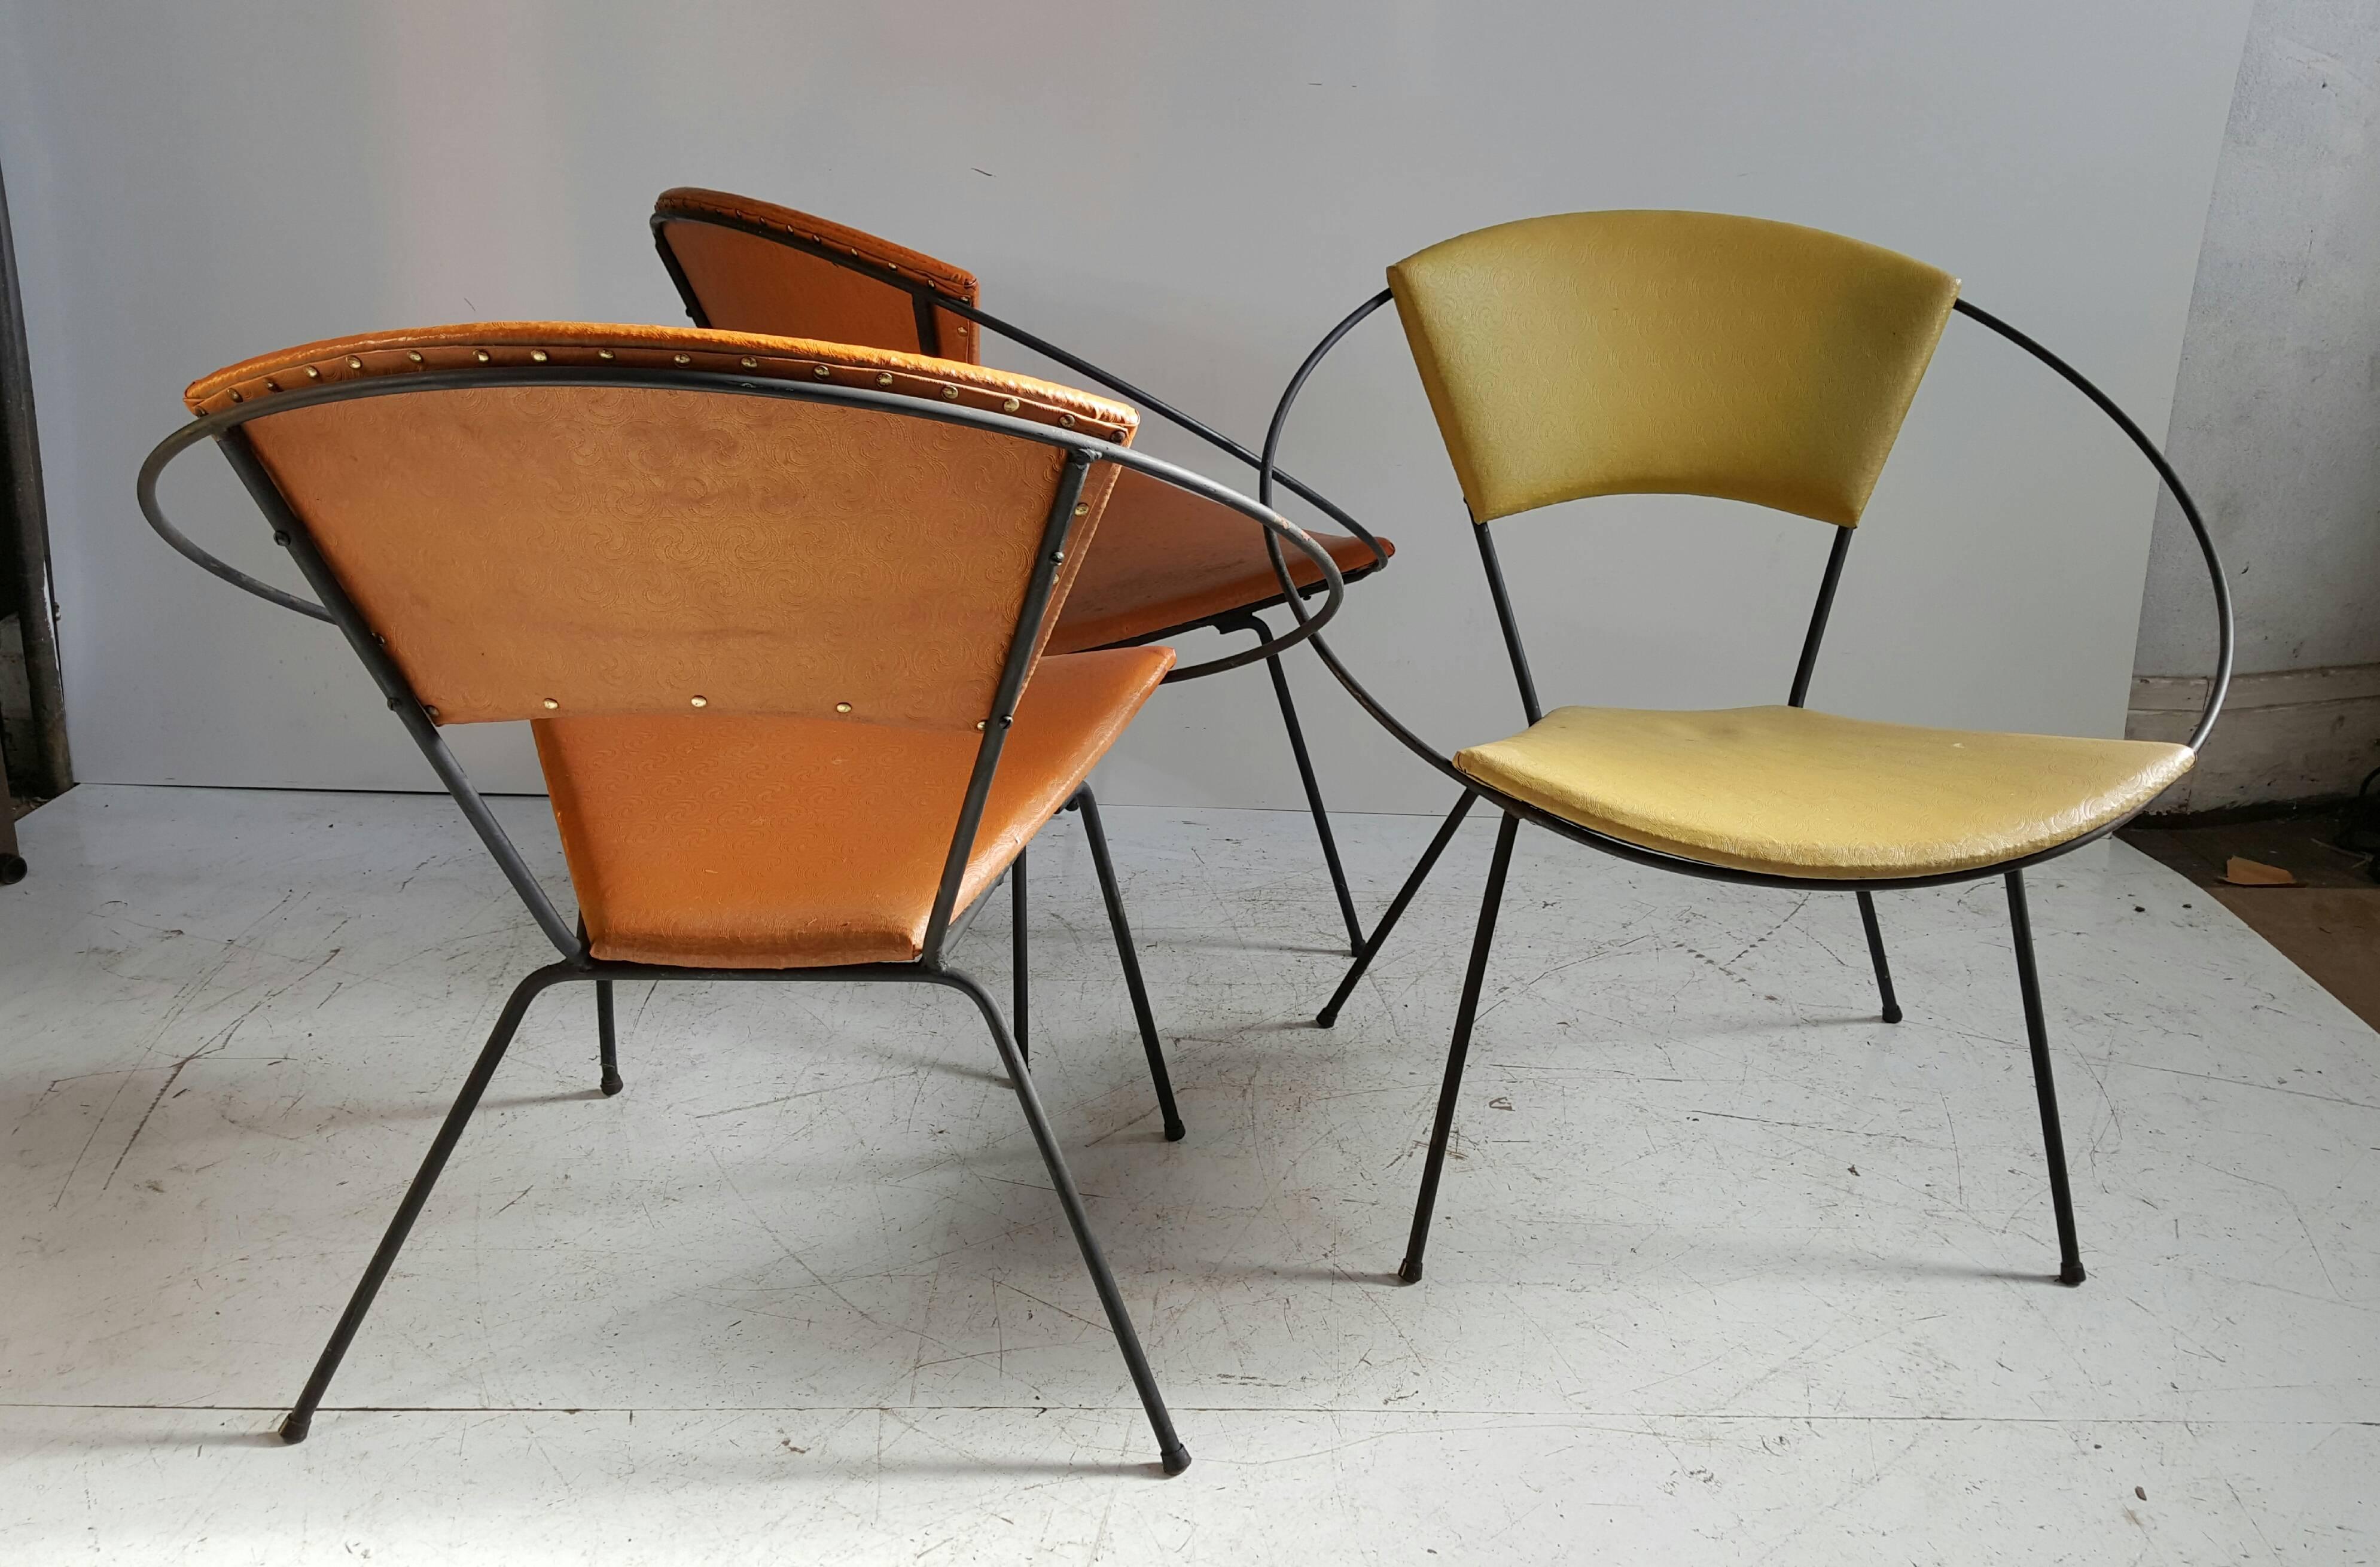 Classic modernist, set of three matching wire iron 'Hoop' garden chairs. Retain original naughyde fabric upholstery and black iron in great condition, great colors, patina.